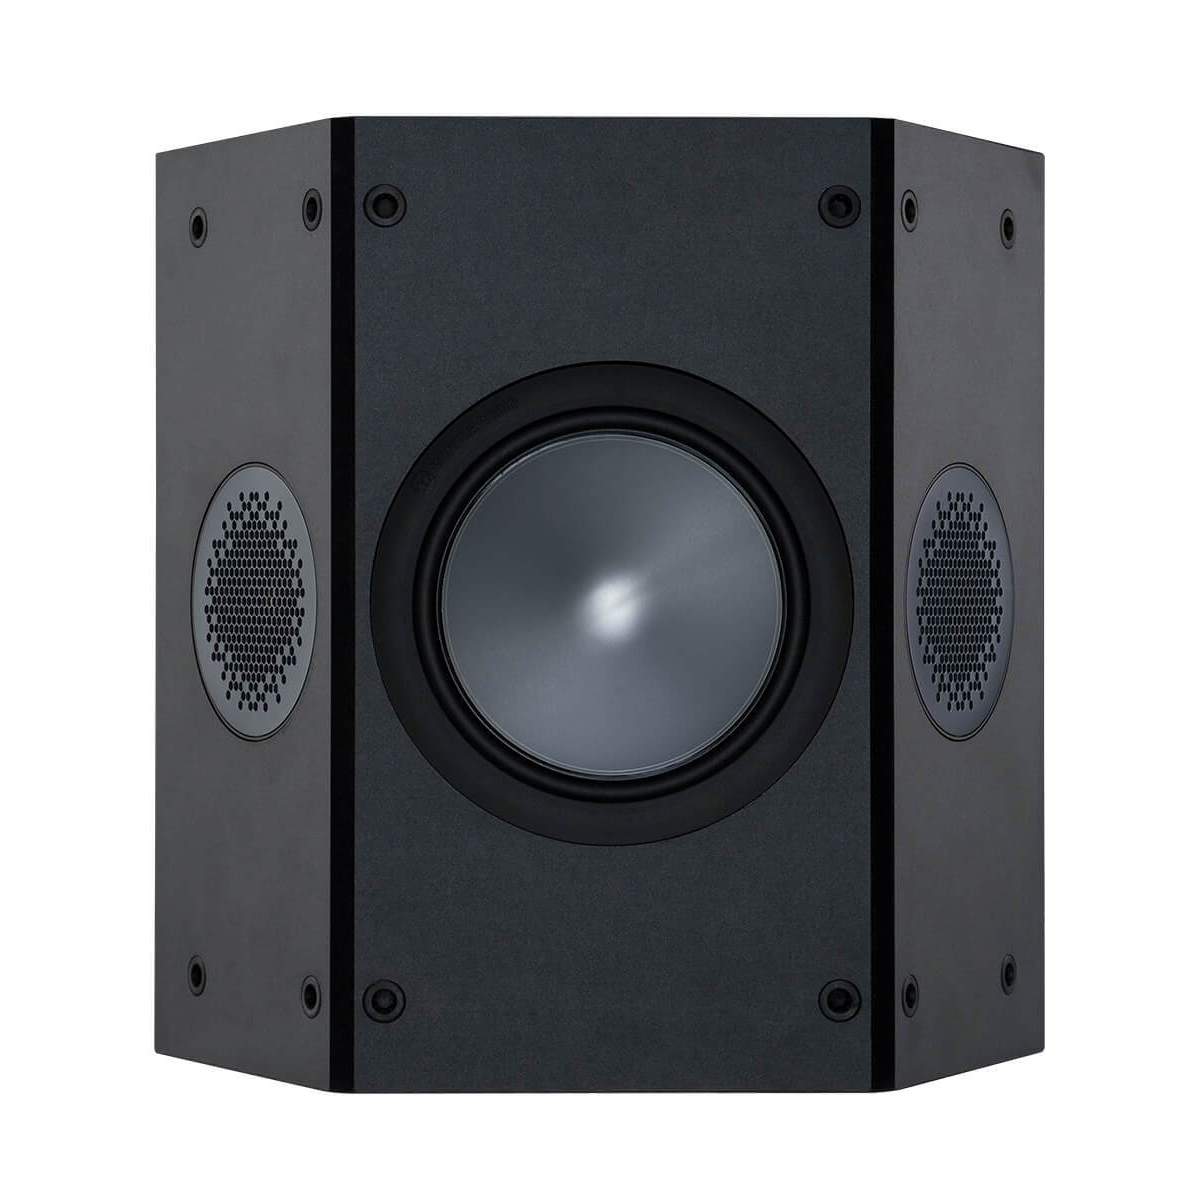 Monitor Audio Monitor Audio Bronze 500 5.1ch Speaker Package With FX Rears - Pack City Promo Speaker Packages